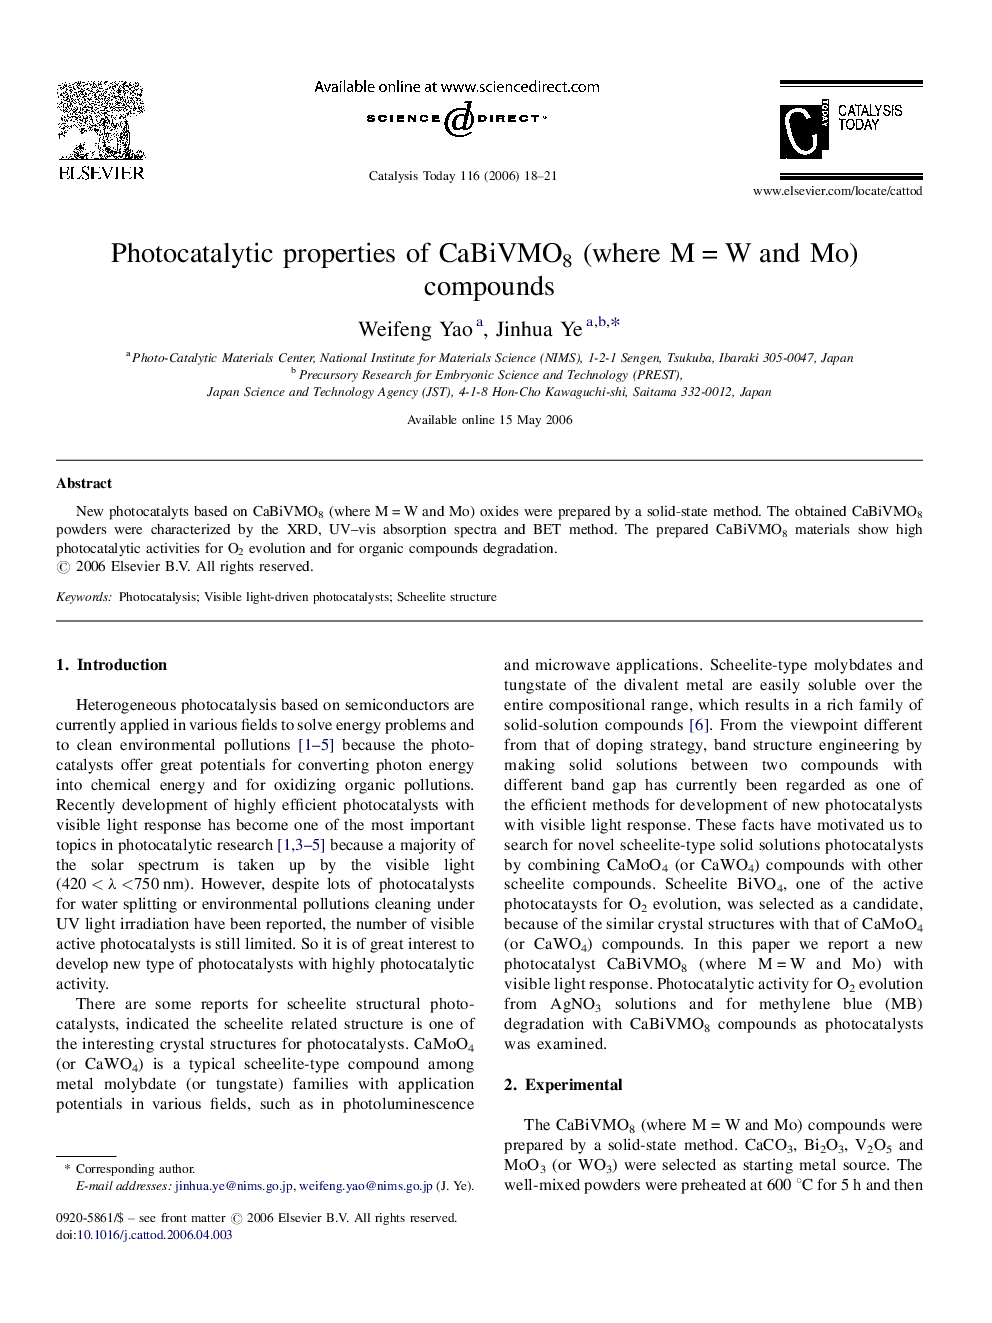 Photocatalytic properties of CaBiVMO8 (where M = W and Mo) compounds